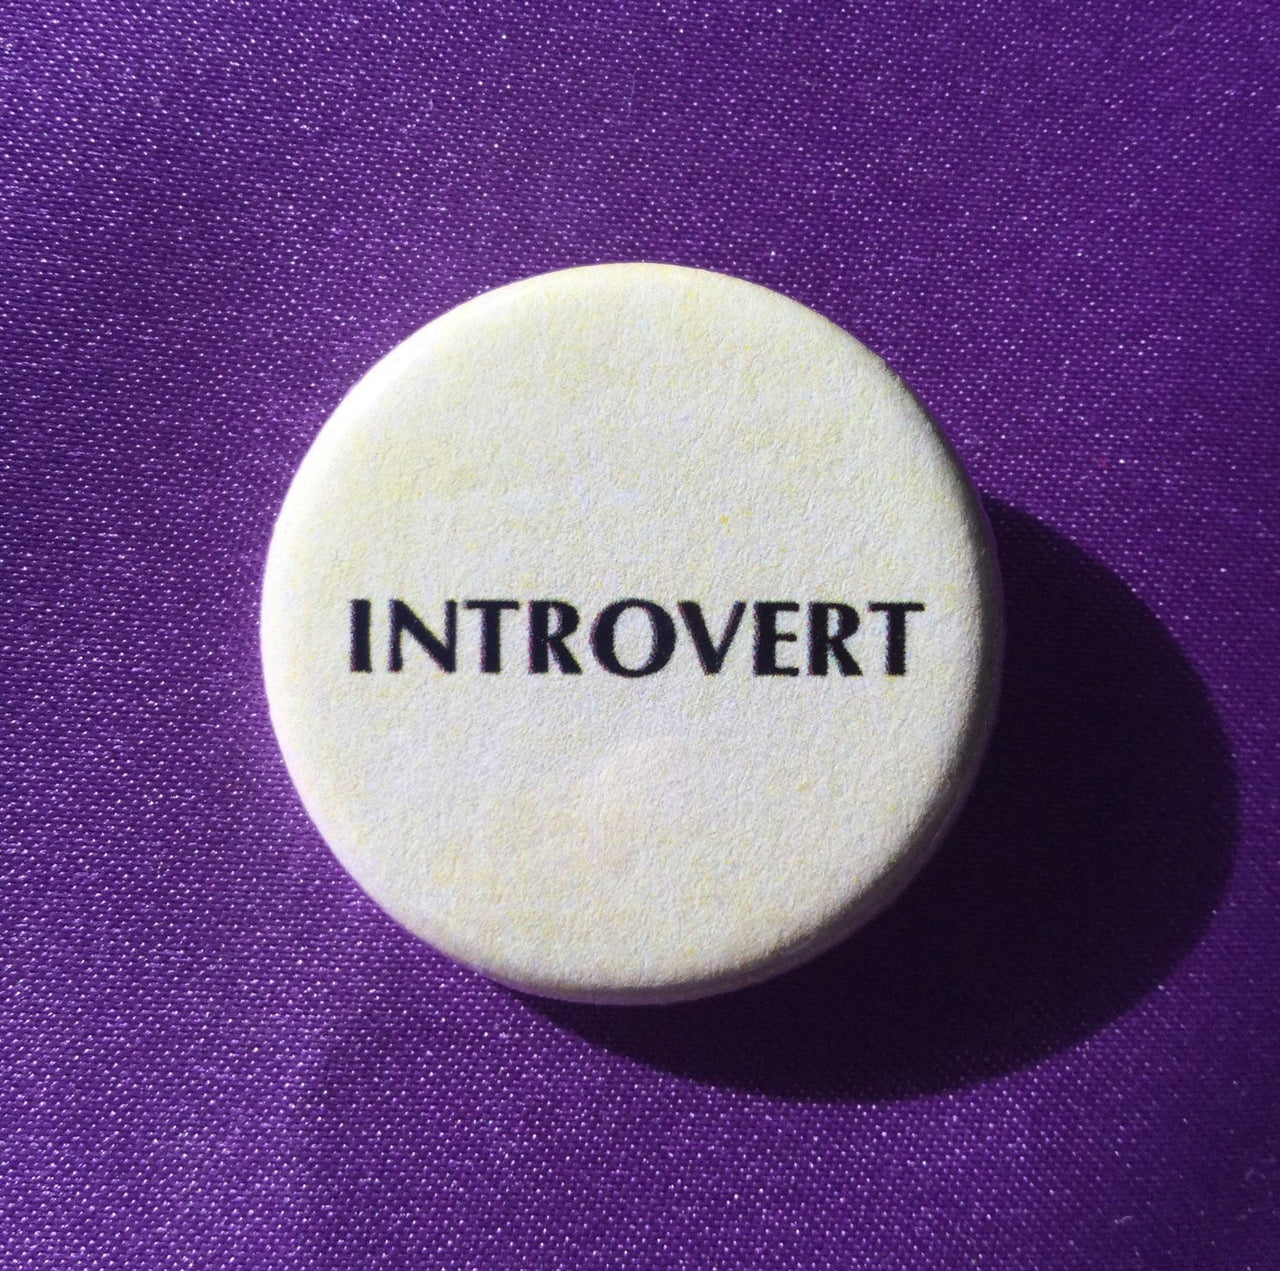 Introvert button - Radical Buttons